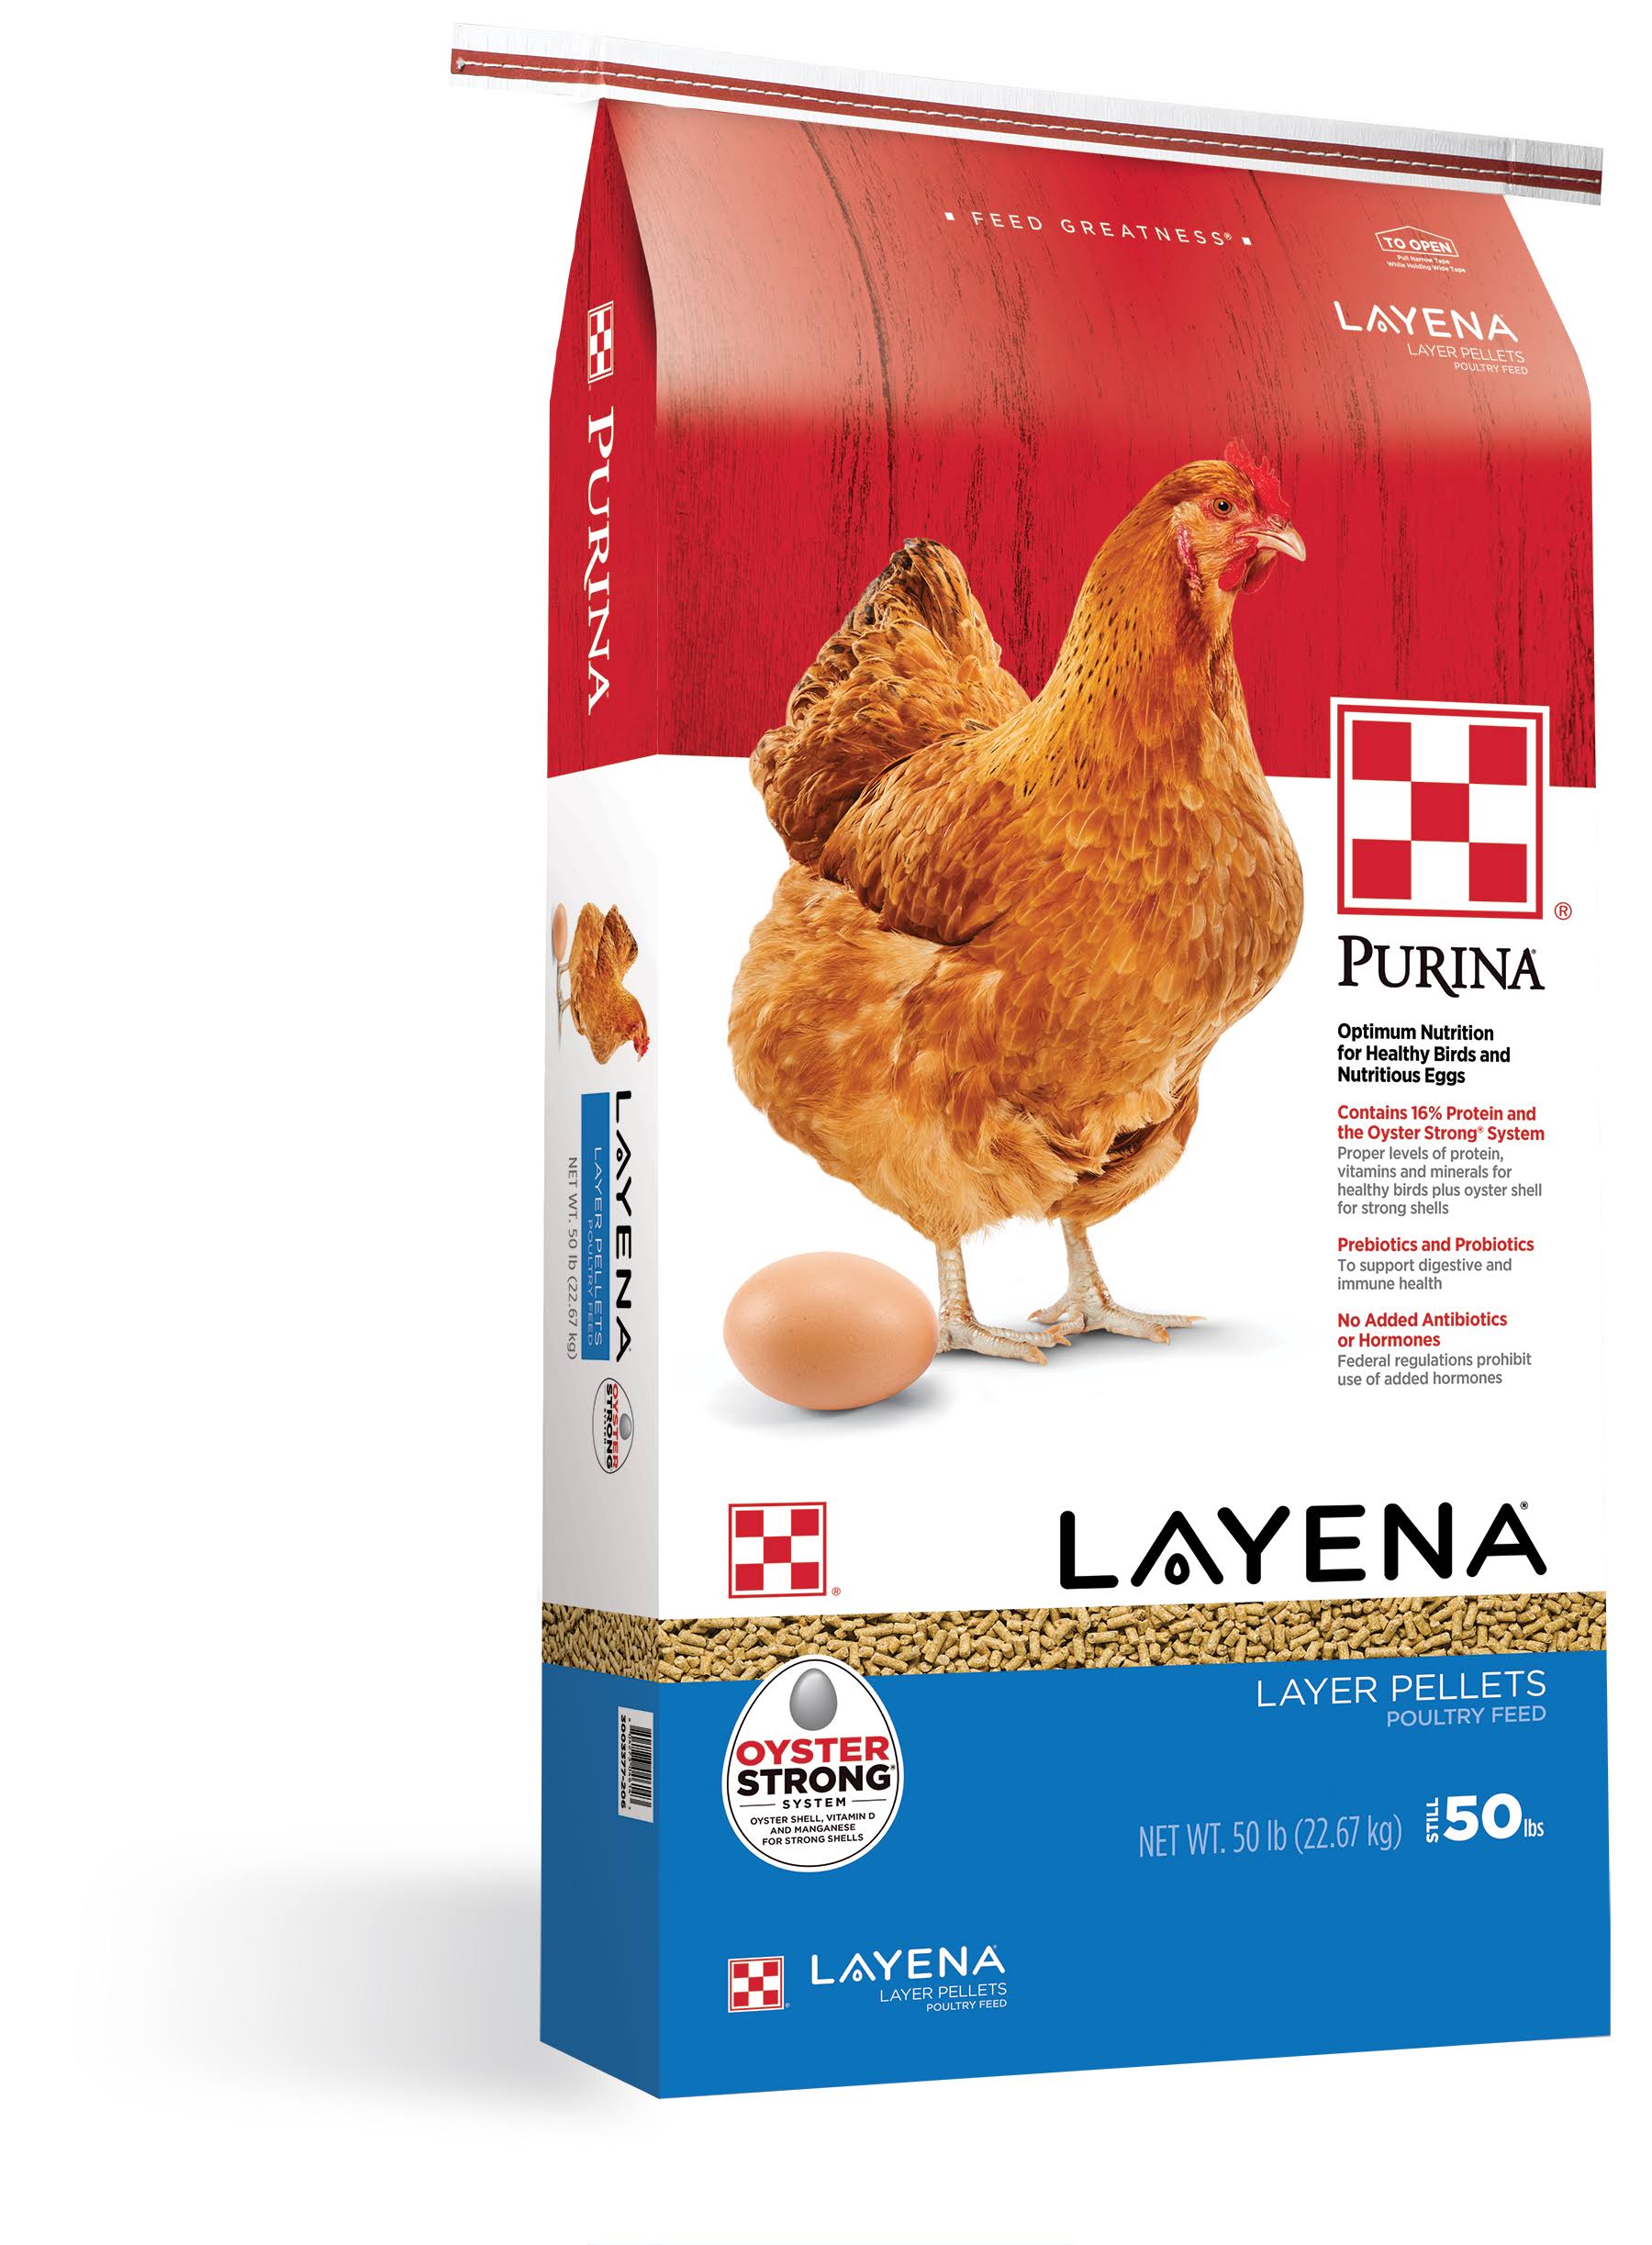 Purina Animal Nutrition Layena Pellet - Oyster, Strong